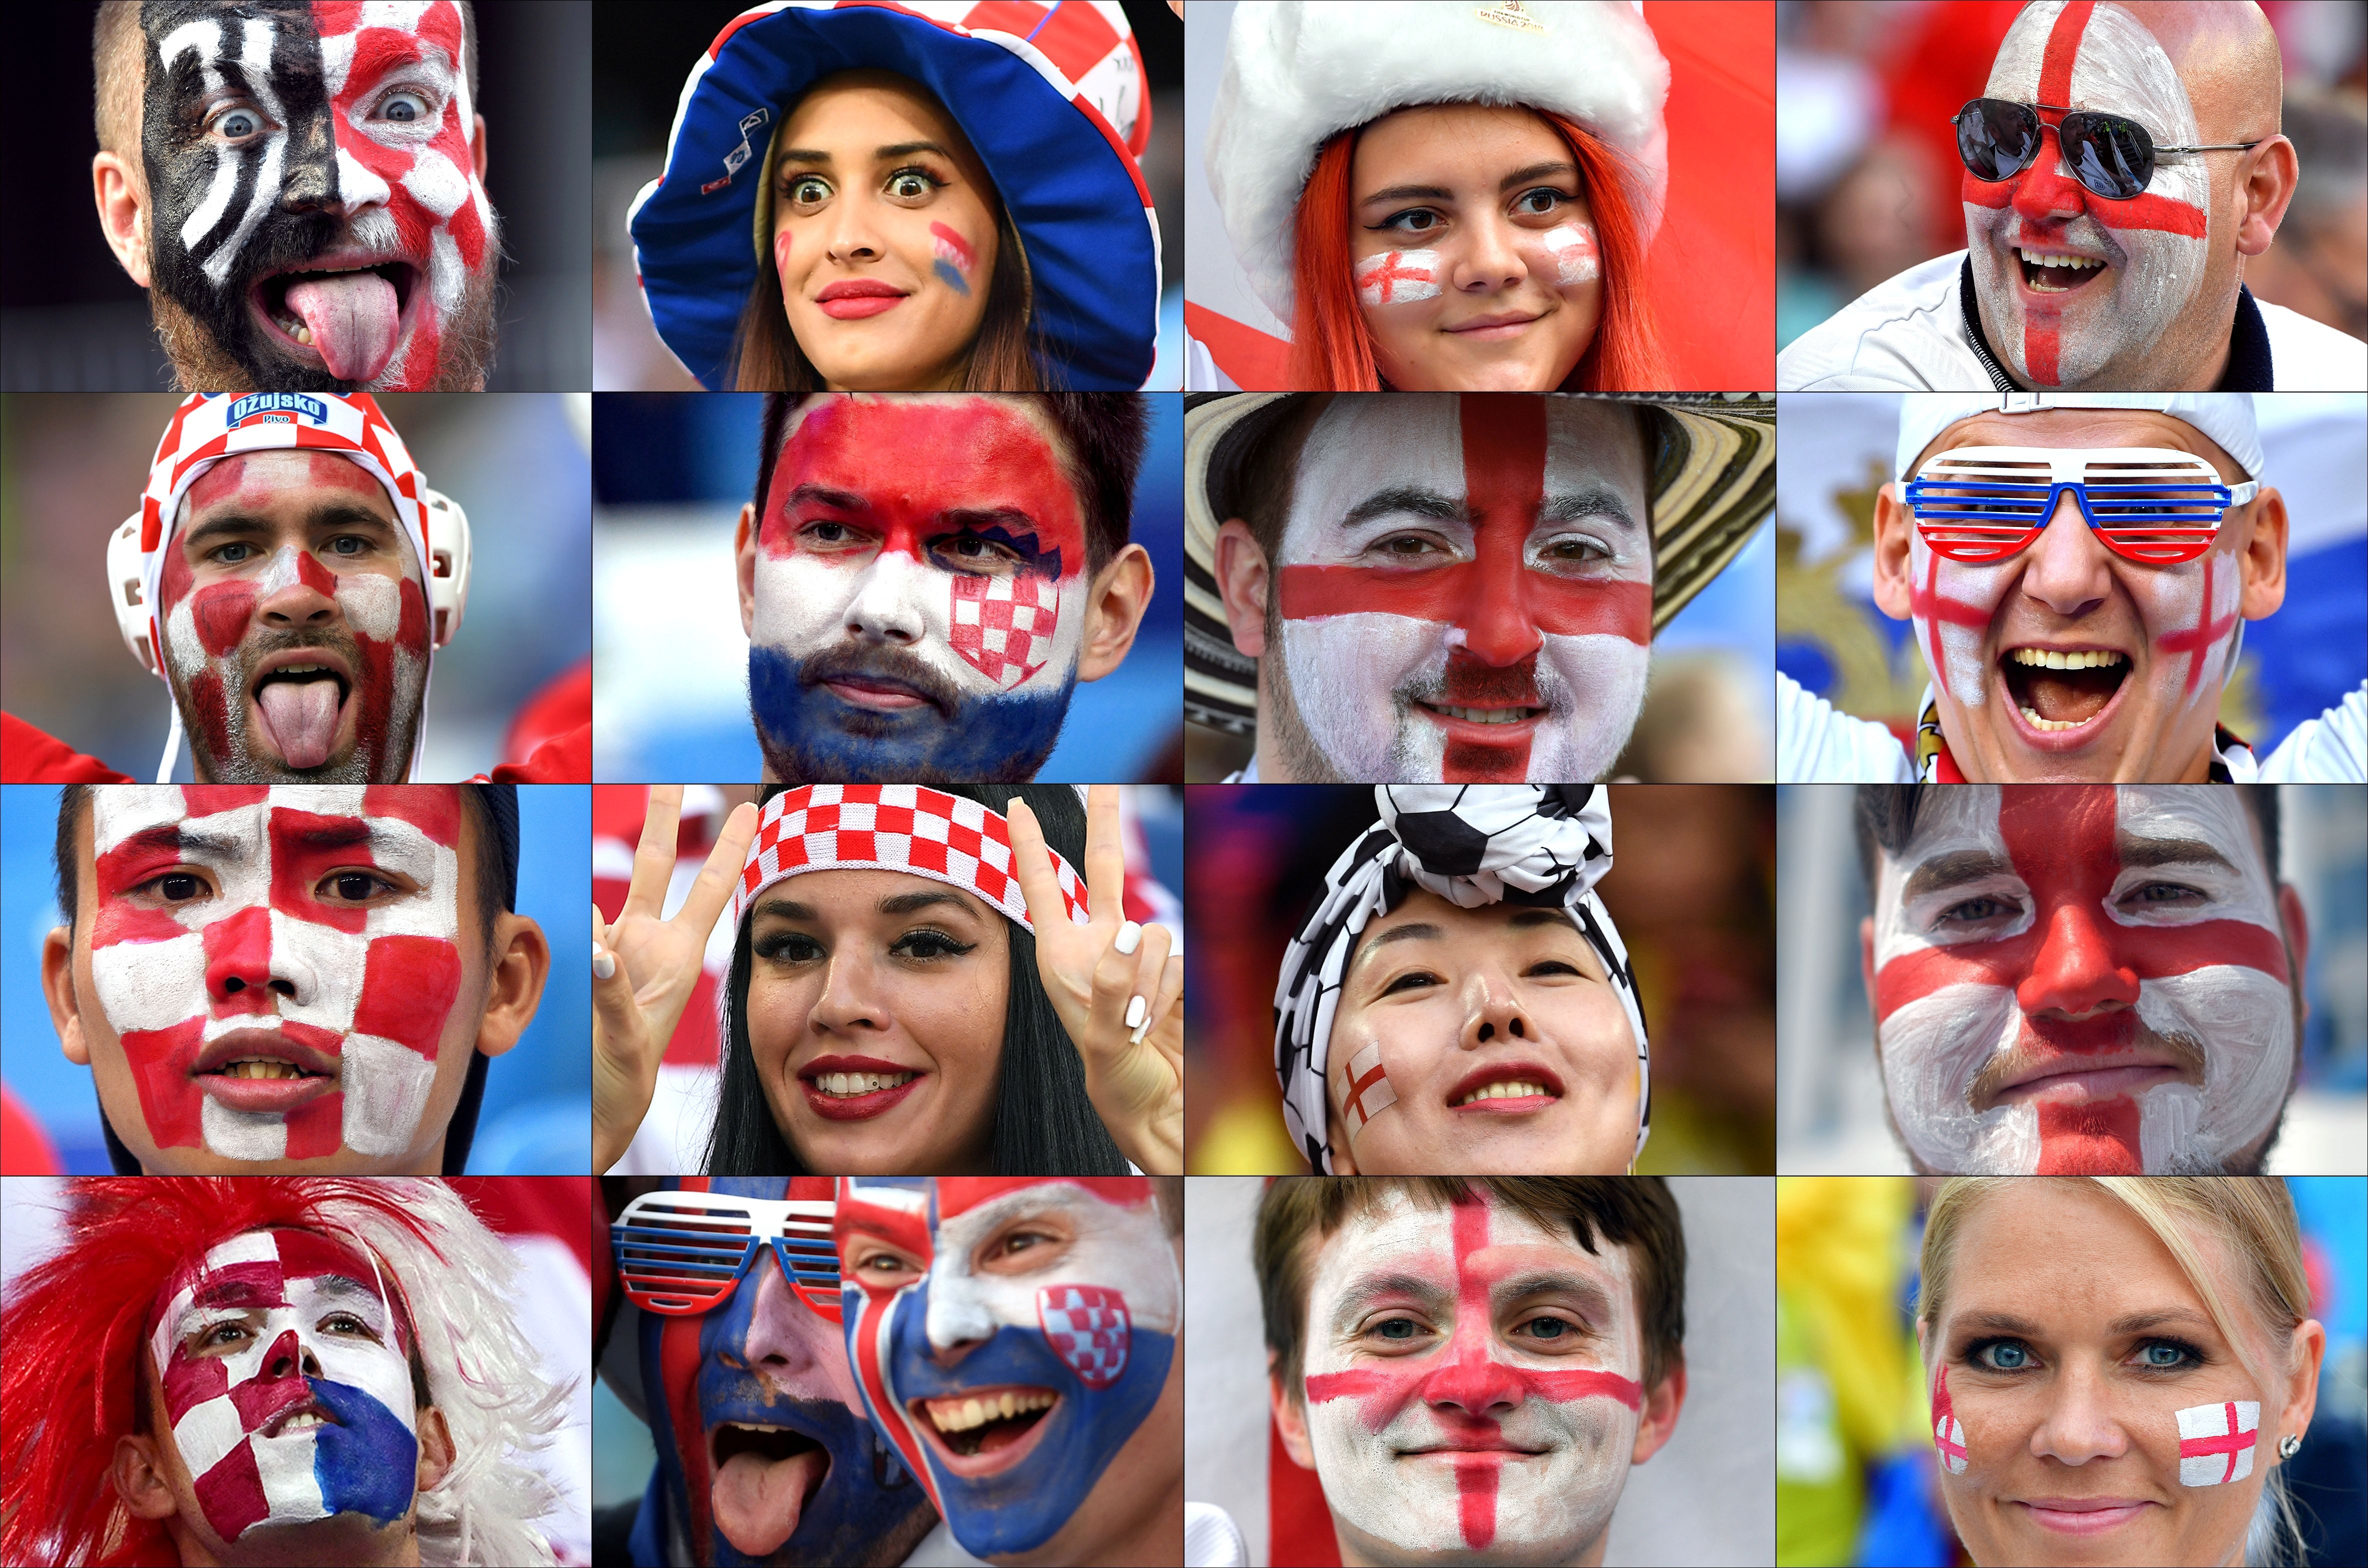 TOPSHOT - (COMBO) This combination of photos created on July 9, 2018 shows Croatia and England's fans supporting their team during the Russia 2018 World Cup football tournament. - Croatia and England will face each other on July 11, 2018 in Moscow for the Russia 2018 World Cup semi-final football match. (Photo by - / AFP)        (Photo credit should read -/AFP/Getty Images)